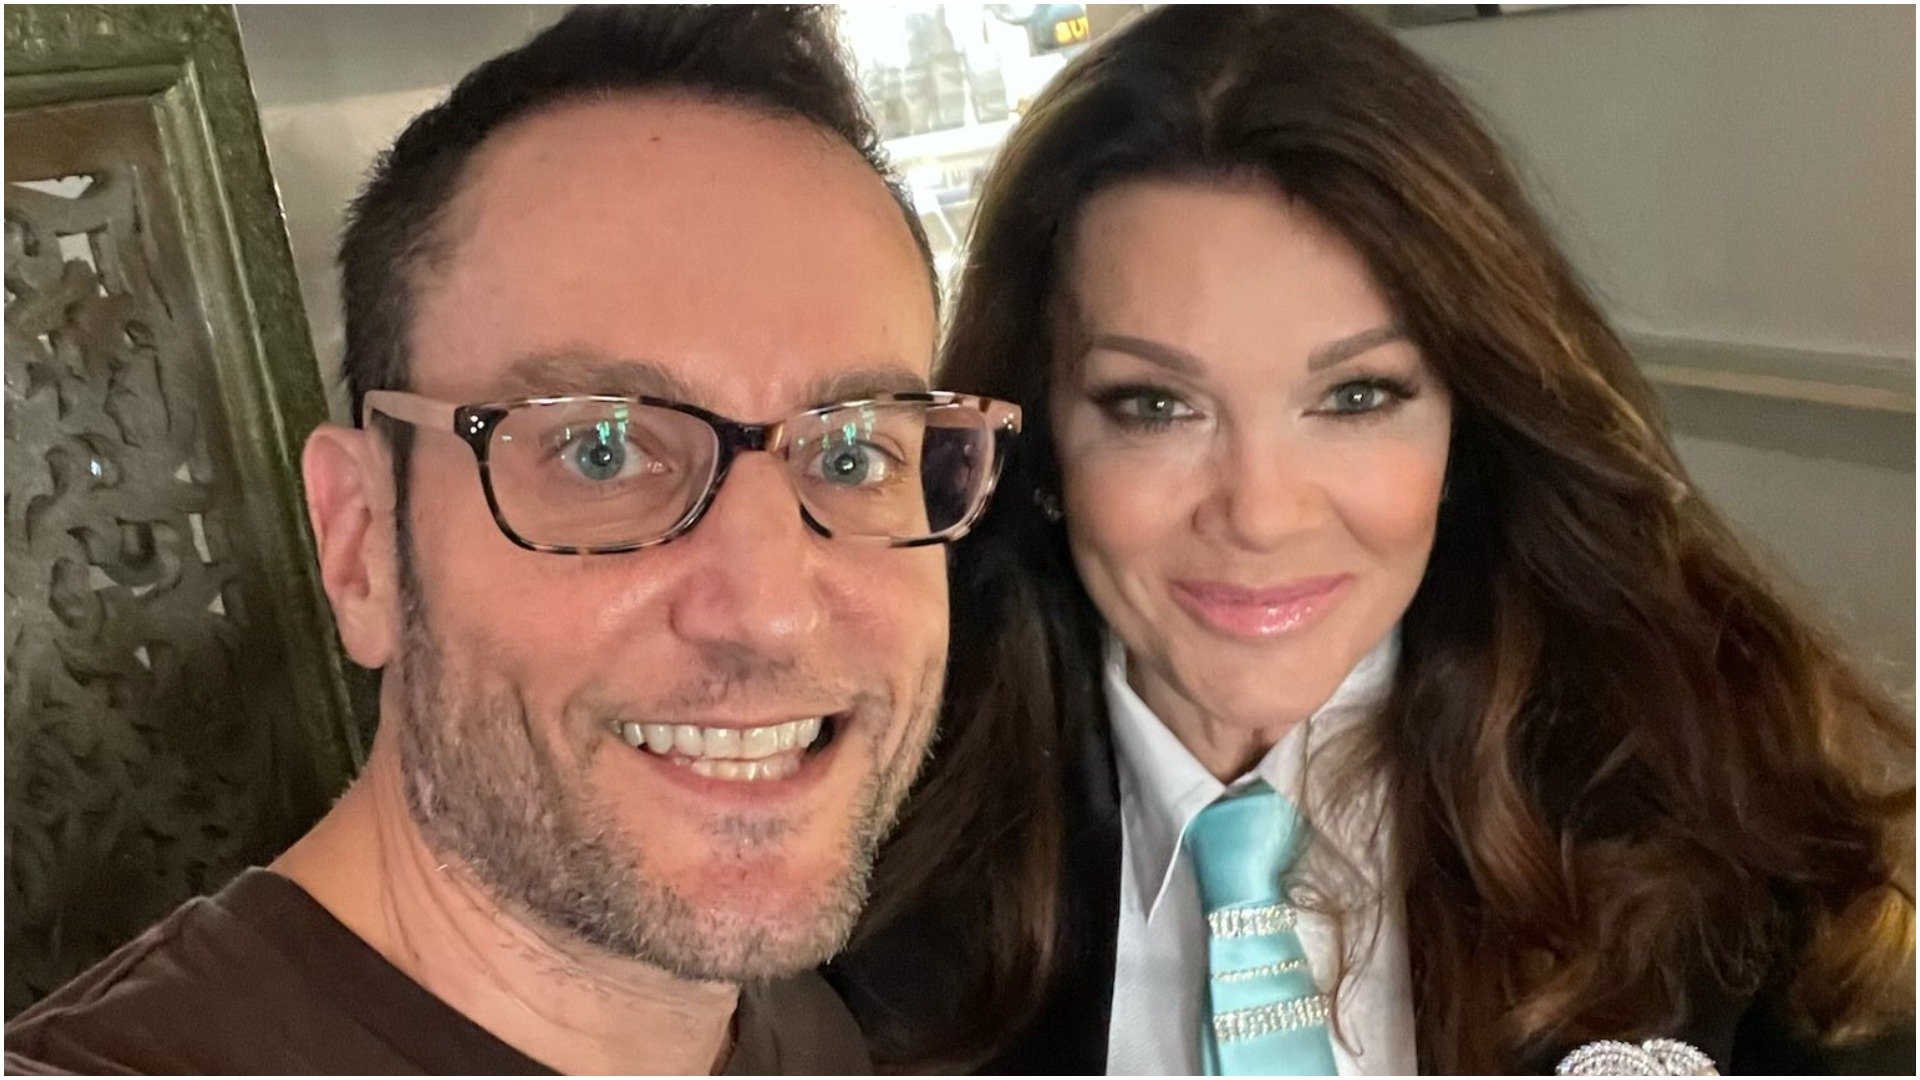 David Yontef sets the record straight about where the remark came from that Lisa Vanderpump would return to RHOBH for $2 million